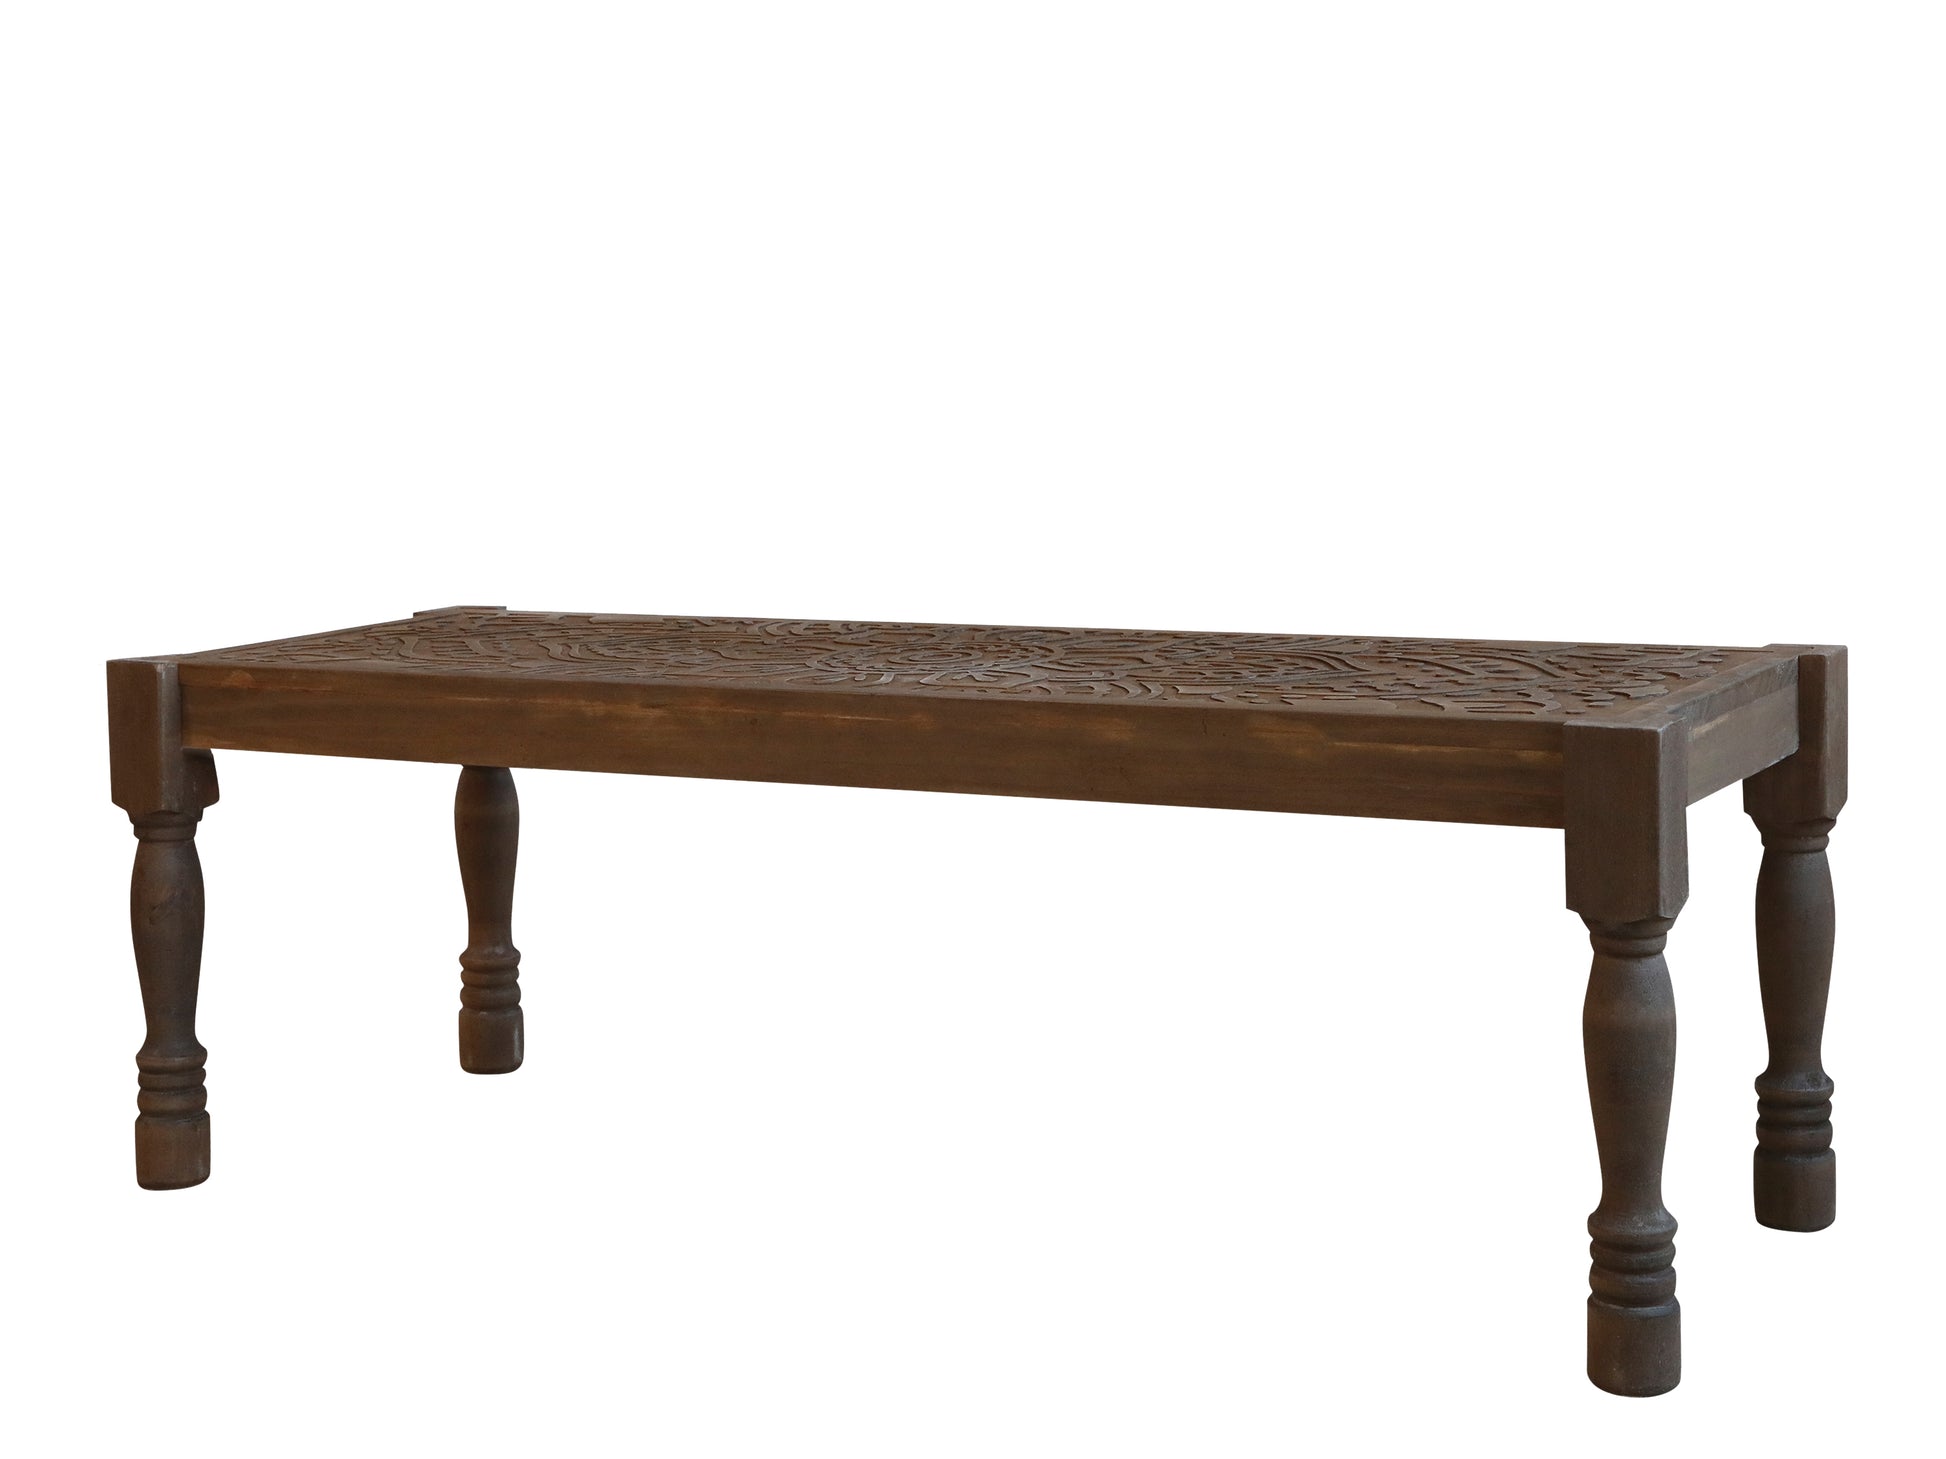 Bench with Carvings on seat, Dimensions 123cm long